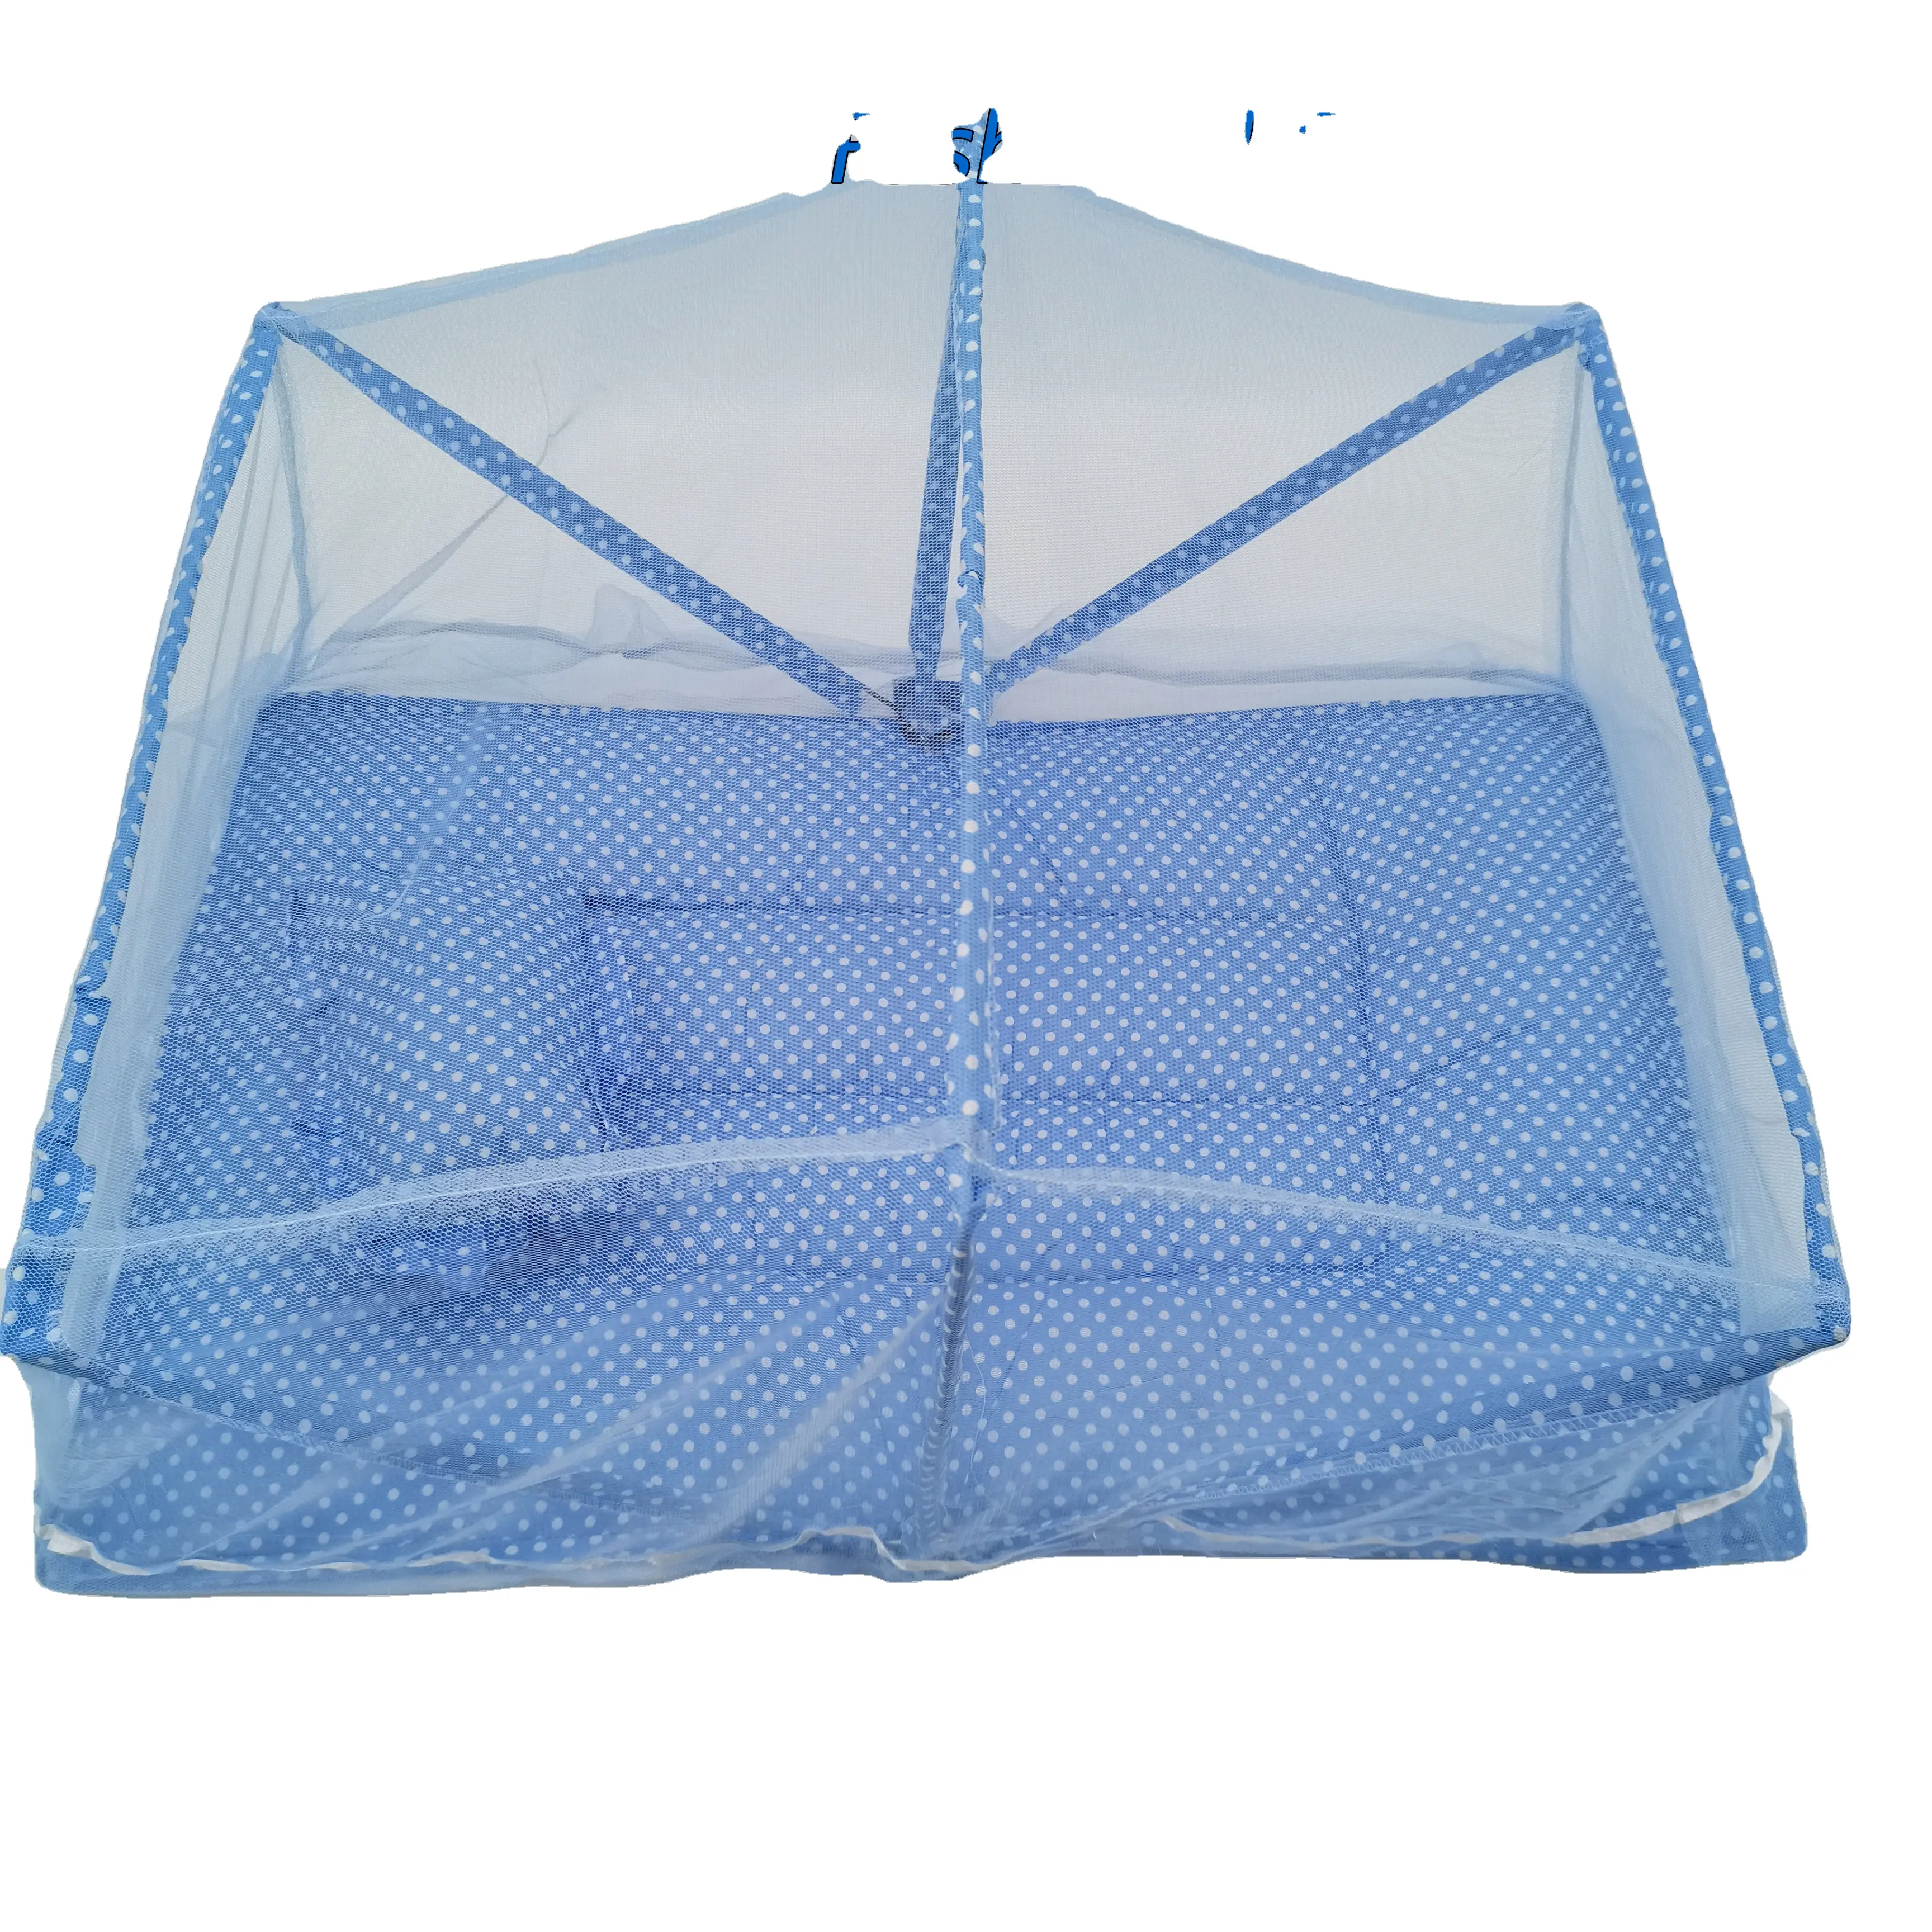 Foldable portable baby safety room for africa baby